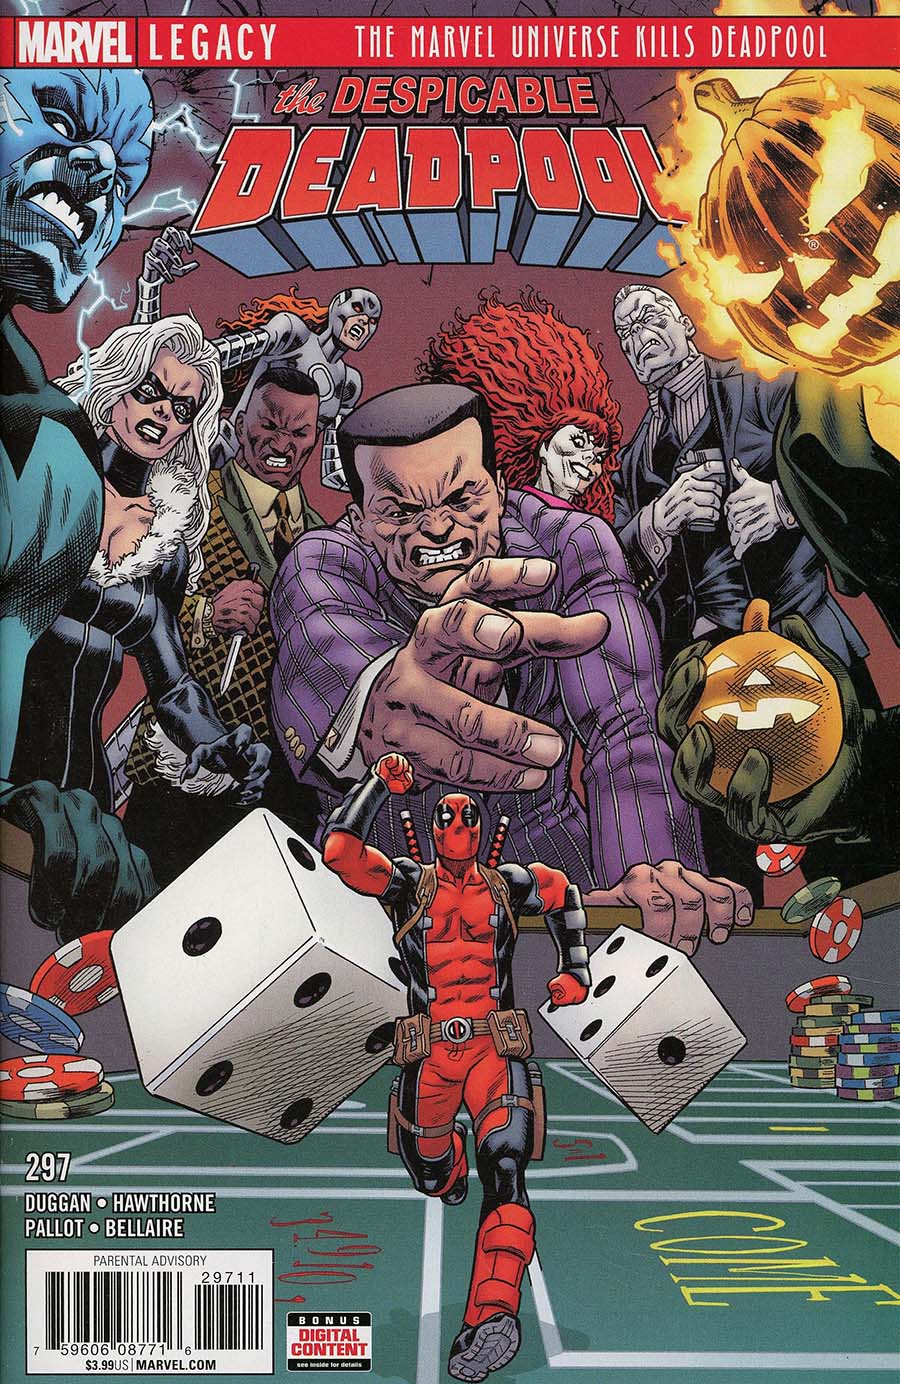 Despicable Deadpool #297 Cover A Regular Mike Hawthorne Cover (Marvel Legacy Tie-In)